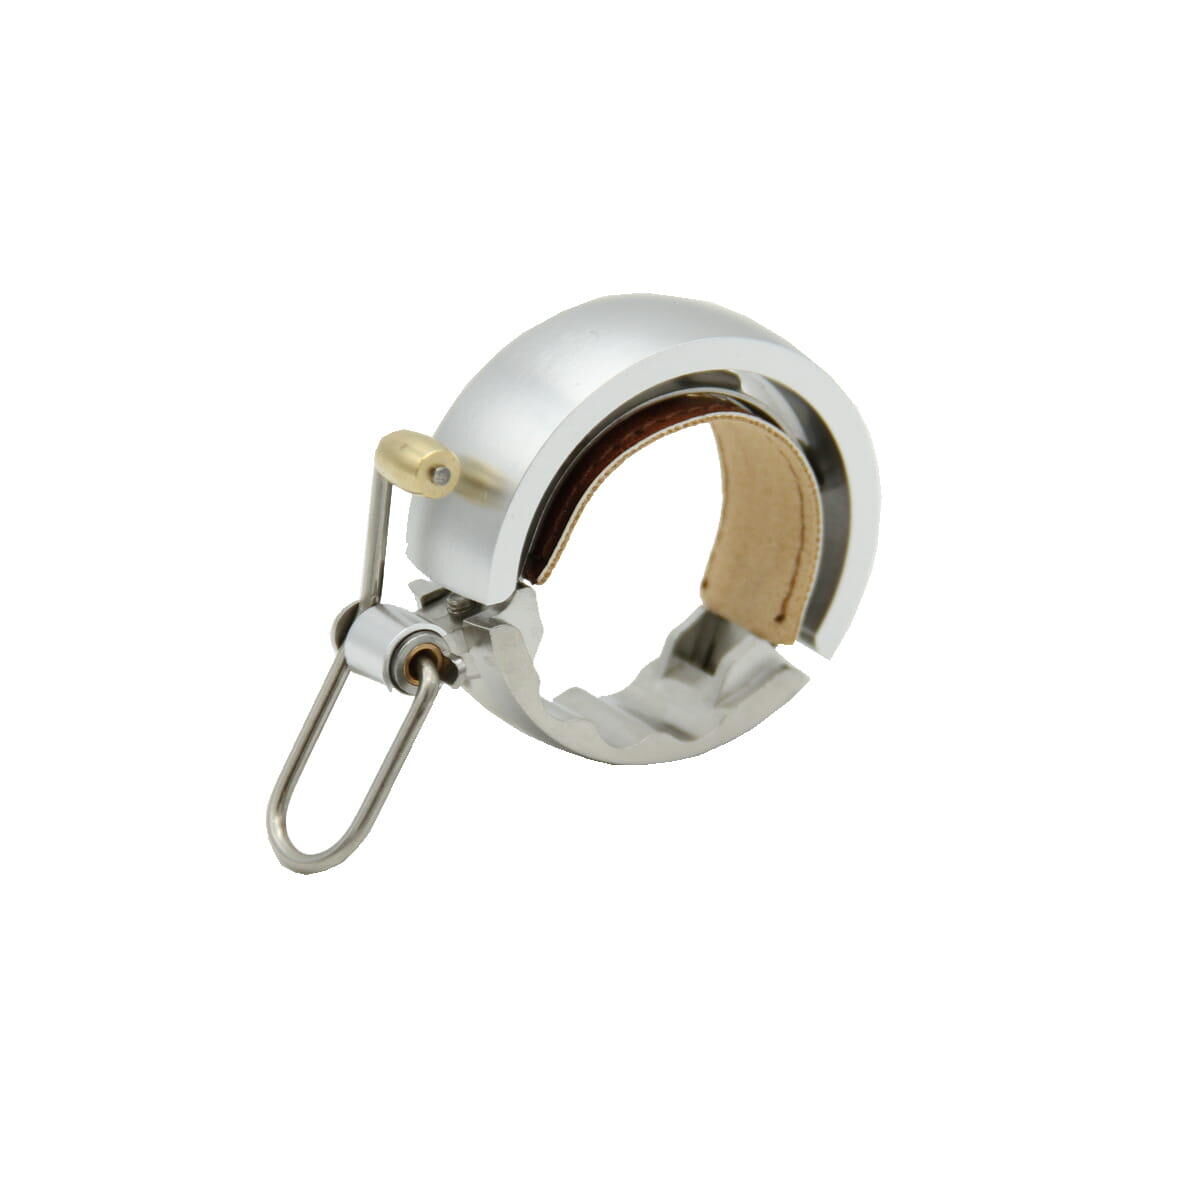 KNOG Knog Oi Luxe Bicycle Bell Large Silver